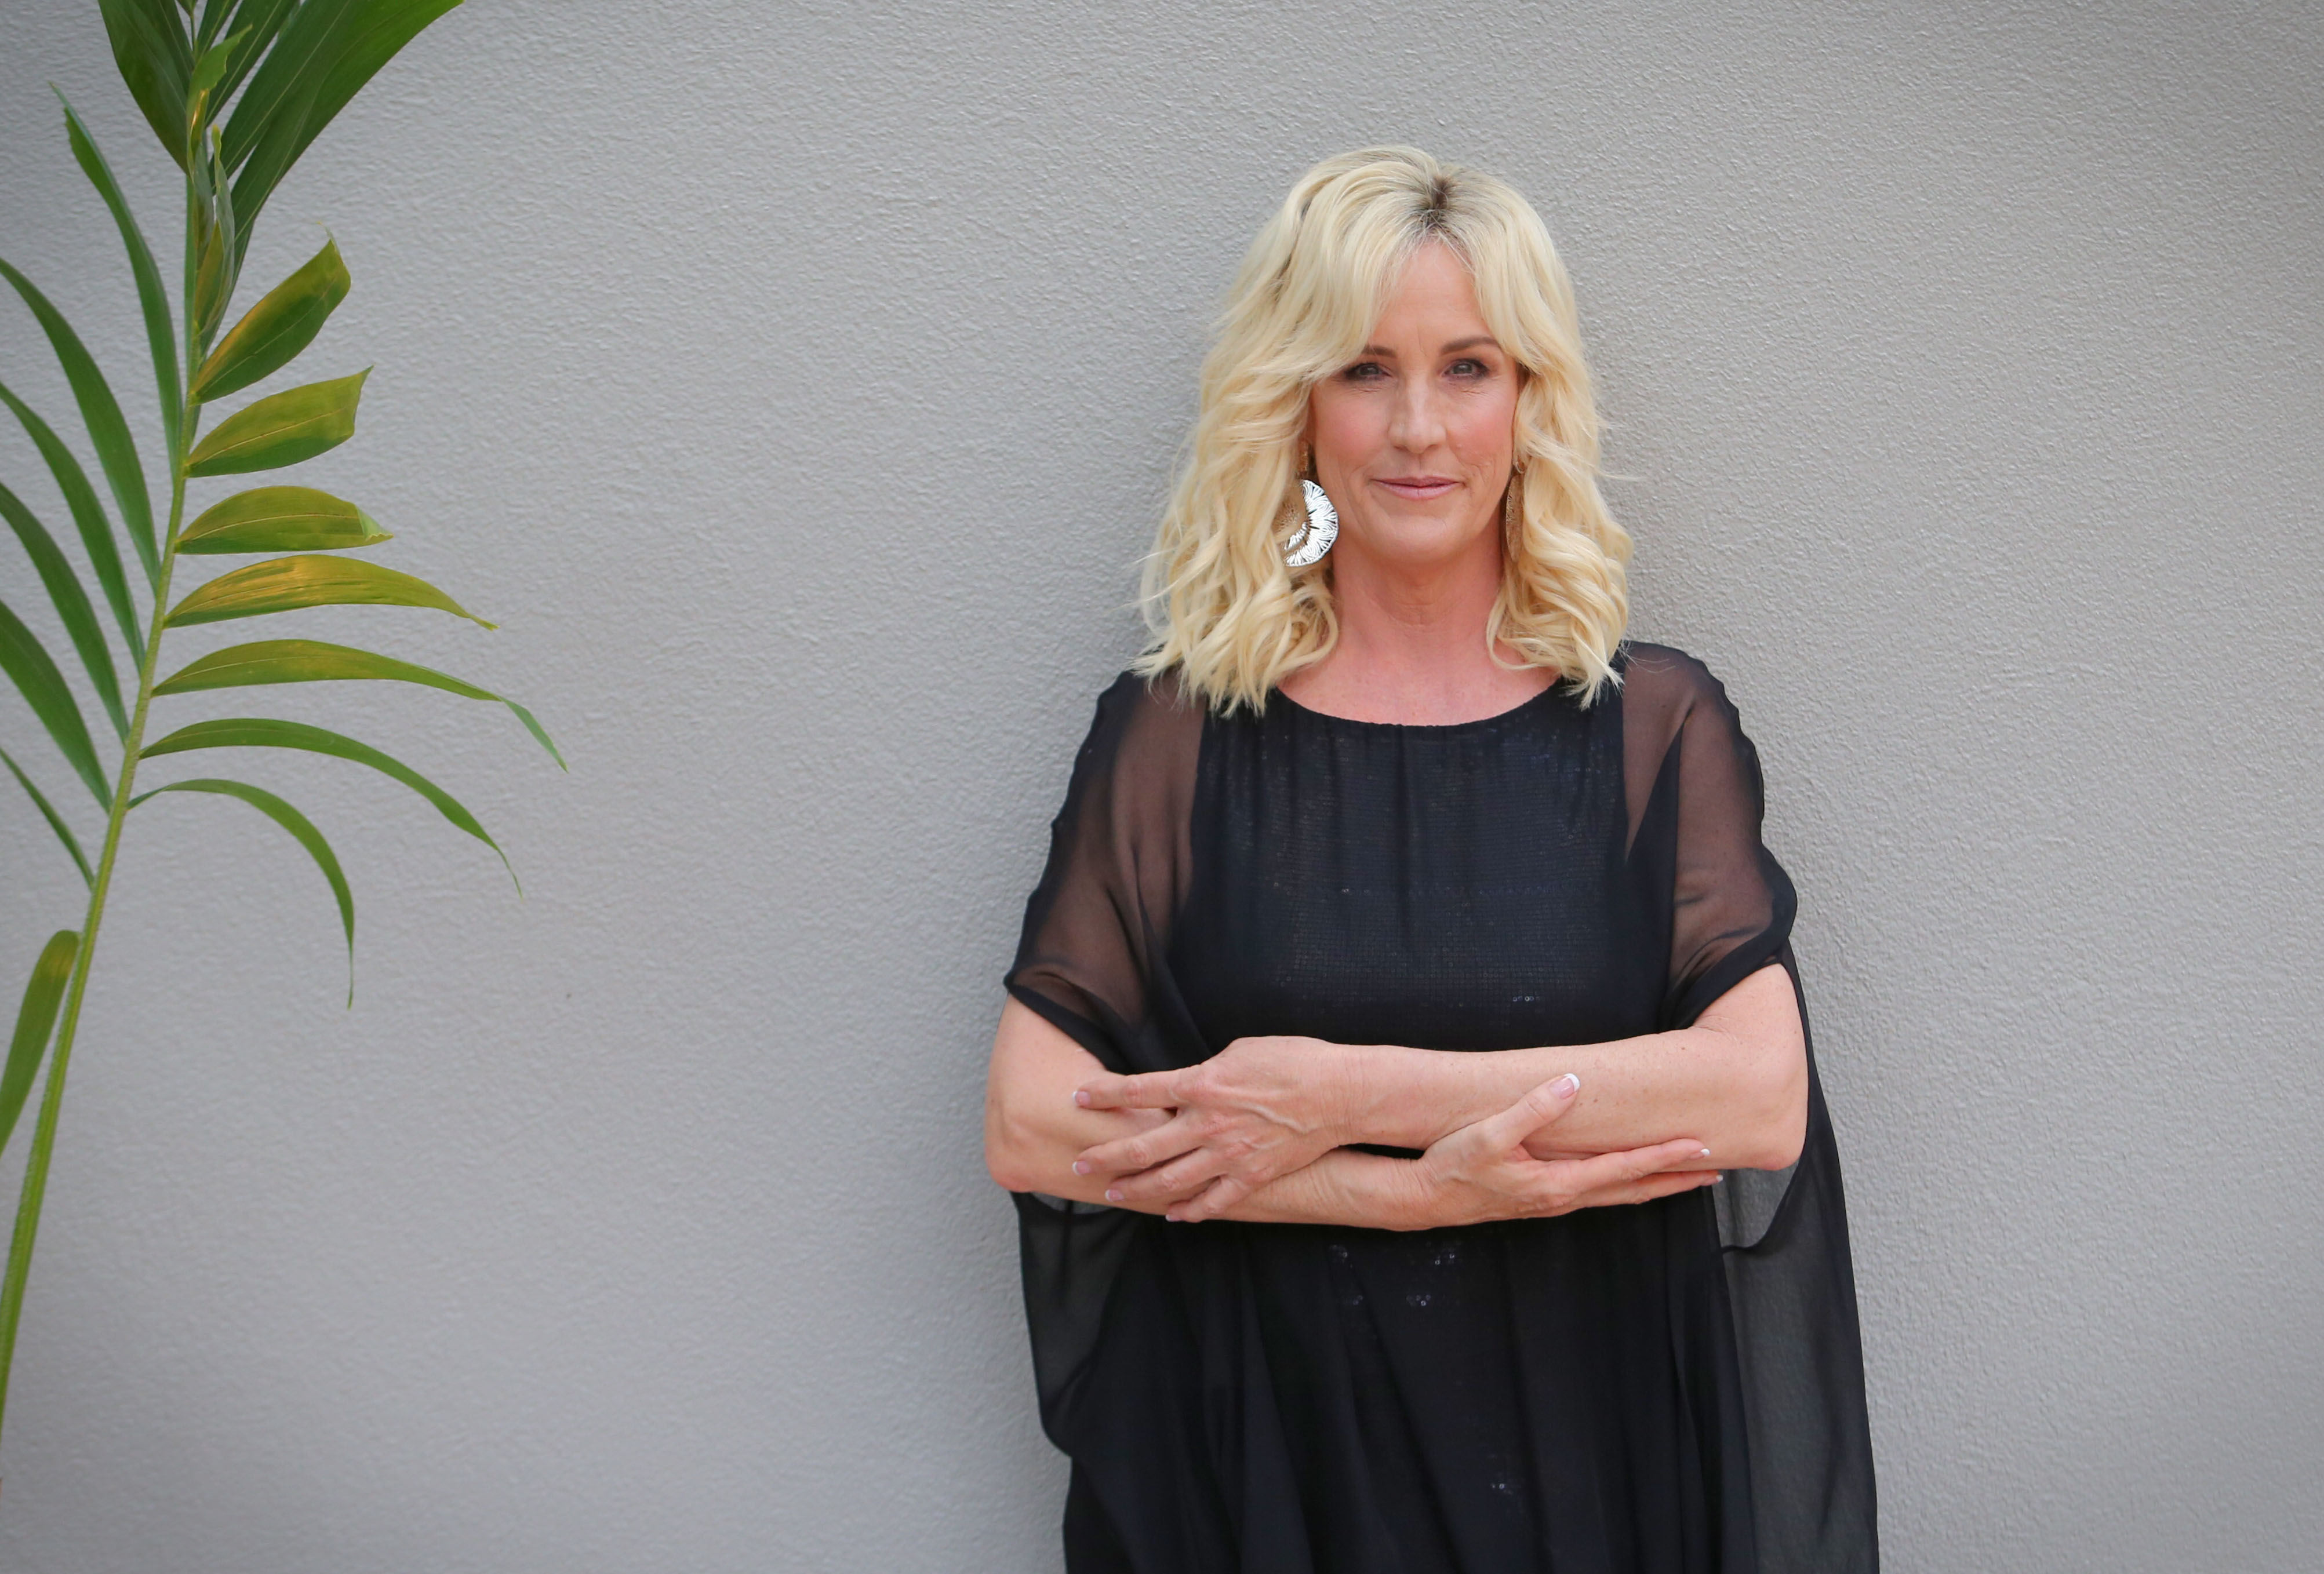 American legal clerk and environmental activist, Erin Brockovich poses during a photo shoot at the Stamford Hotel in Brisbane, Australia, on February 17, 2015. (Jamie Hanson—Newspix via Getty Images)